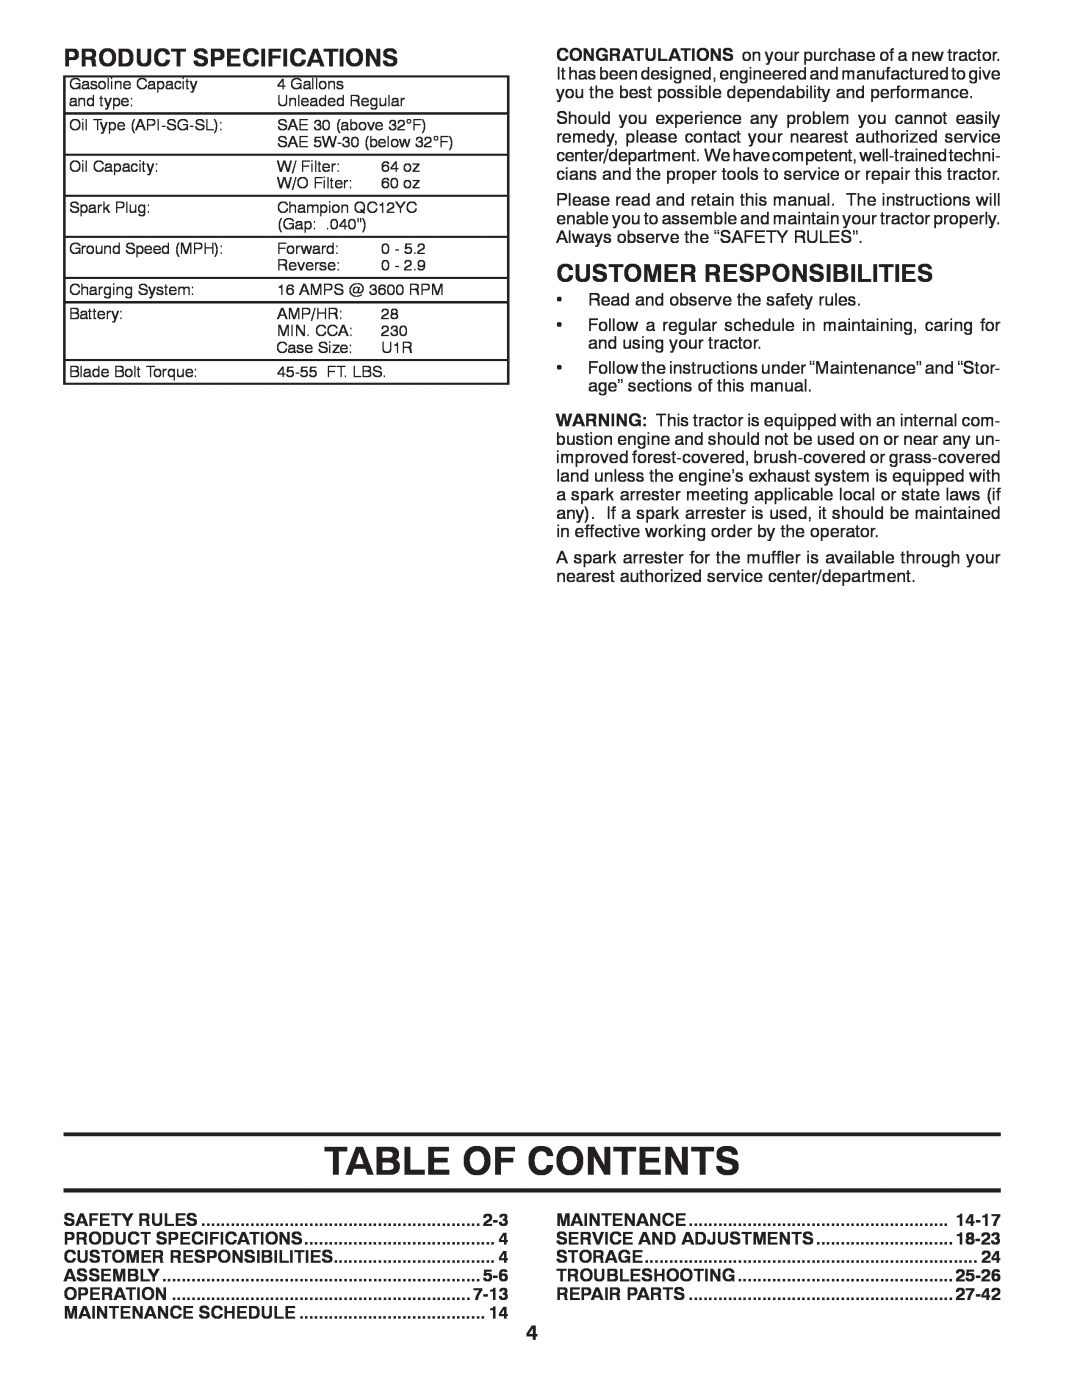 Husqvarna YTH2242TDF owner manual Table Of Contents, Product Specifications, Customer Responsibilities 